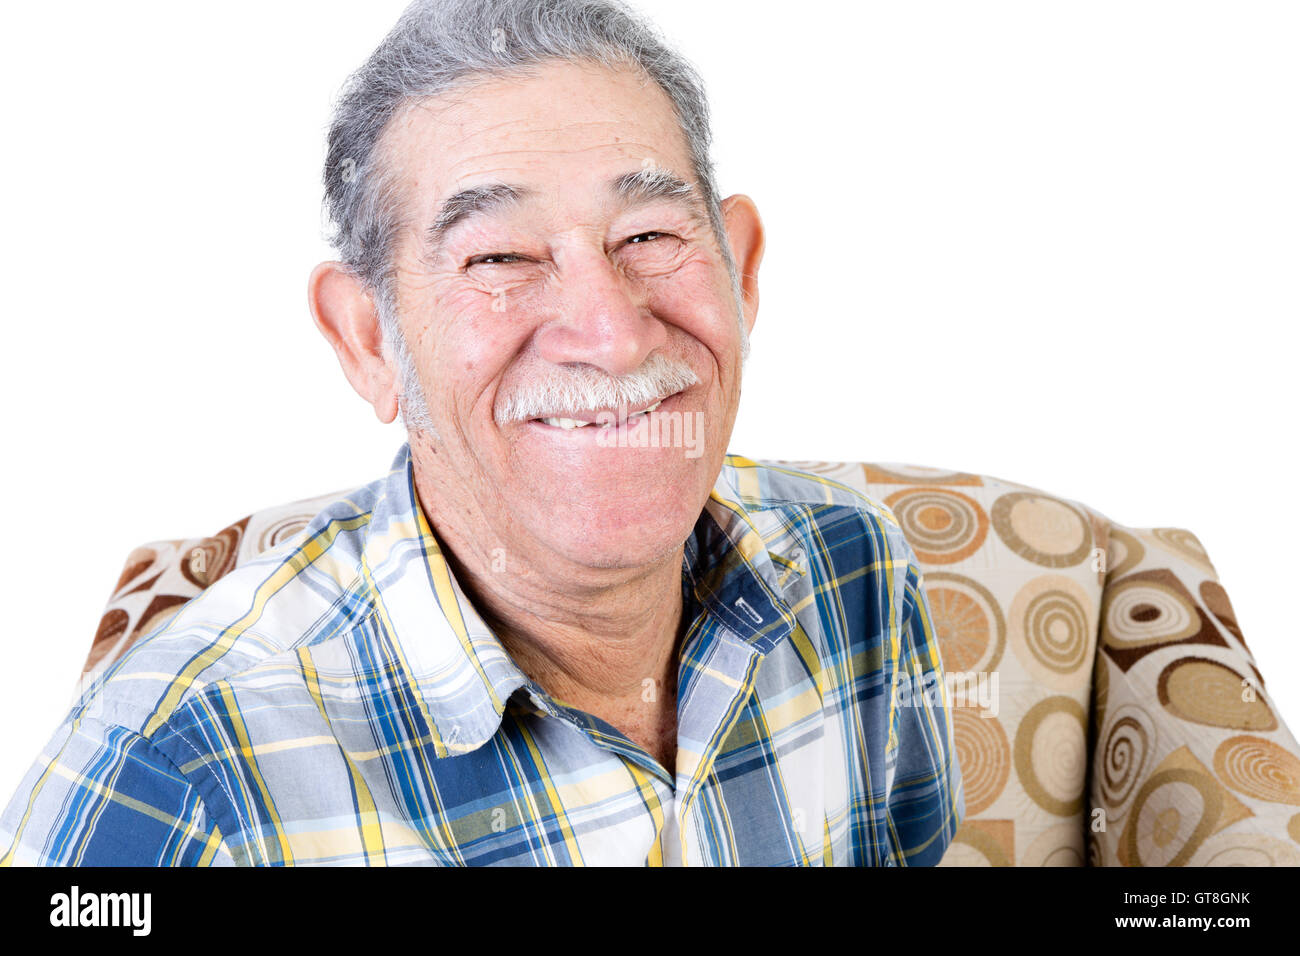 Handsome single Mexican man sitting on chair with big smile and mustache in flannel shirt Stock Photo